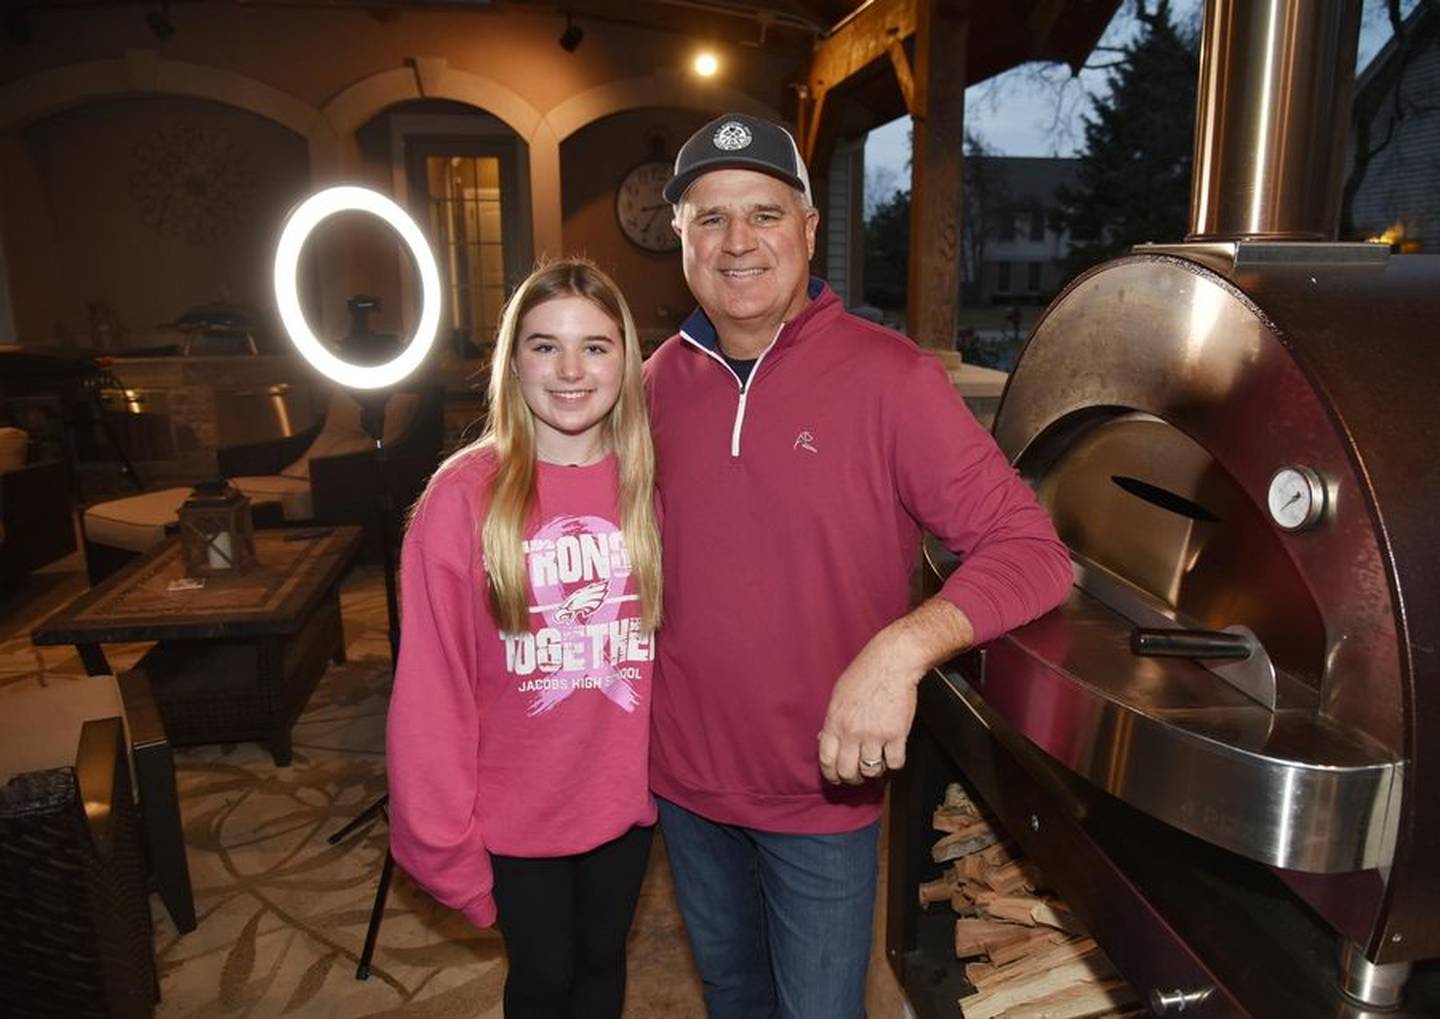 Fifteen-year-old Lindsey Postelnick, left, persuaded her dad, Darryl, to start making TikTok videos. Two years later, he has 2.7 million followers.